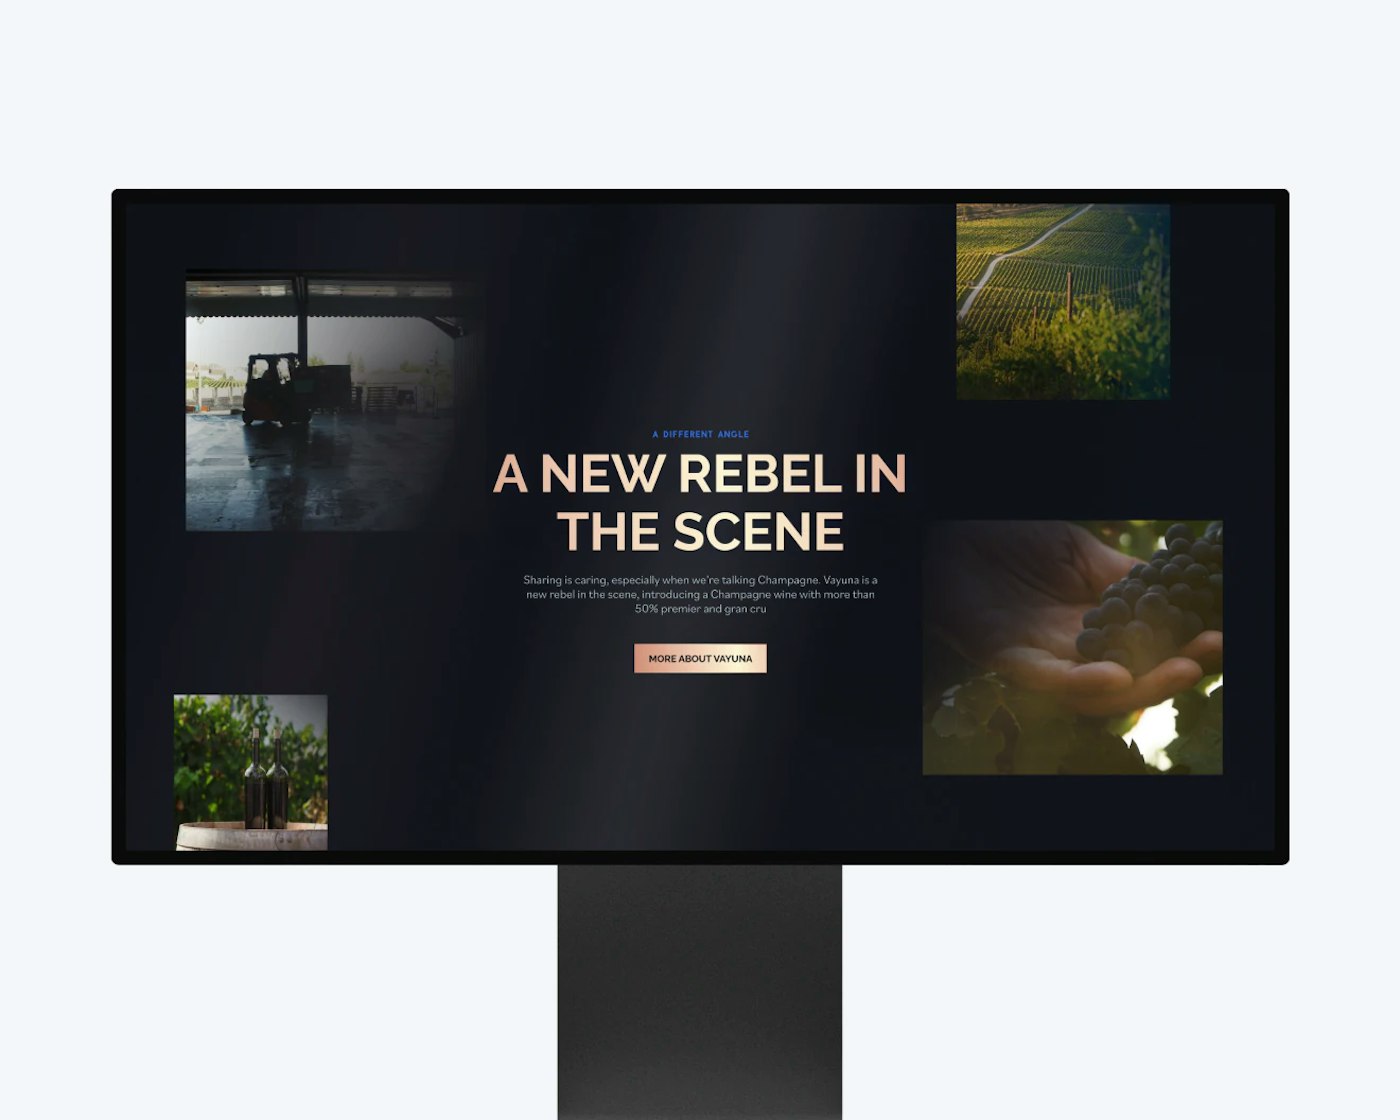 Monitor displaying a webpage for VAYUNA Champagne with a bold headline 'A NEW REBEL IN THE SCENE' and a collage of images, including vineyards and grapes, reflecting the brand's unique approach. A button invites to learn more about VAYUNA, all set within a dark-themed layout.